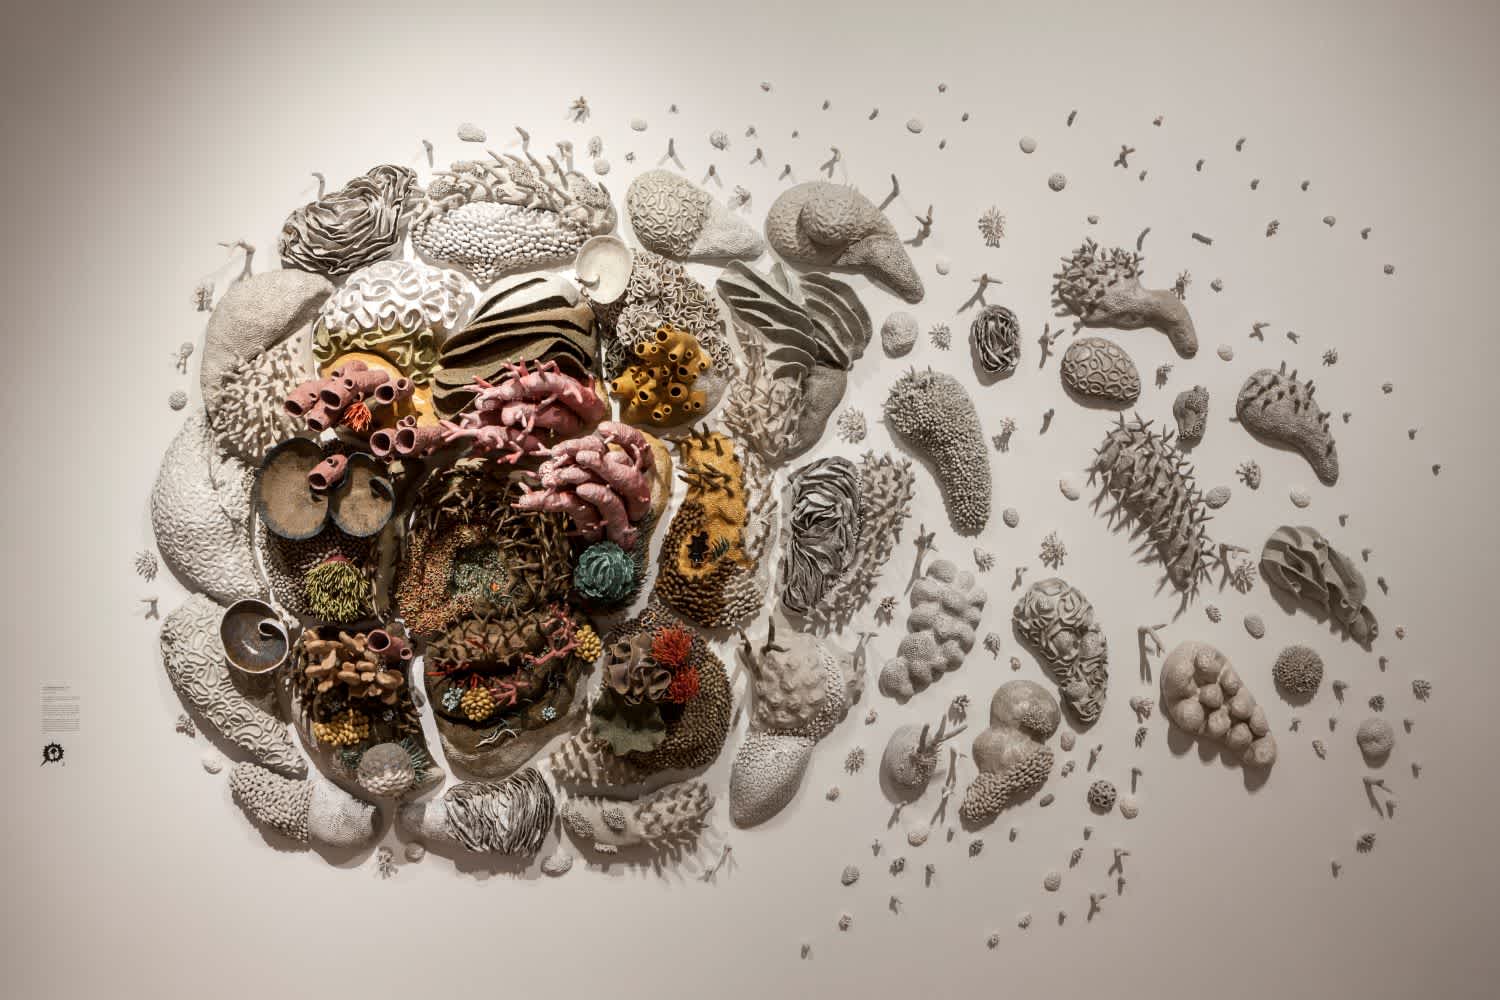 Our Changing Seas III by artist Courtney Mattison for the exhibition Sea Change at Virginia MOCA. 